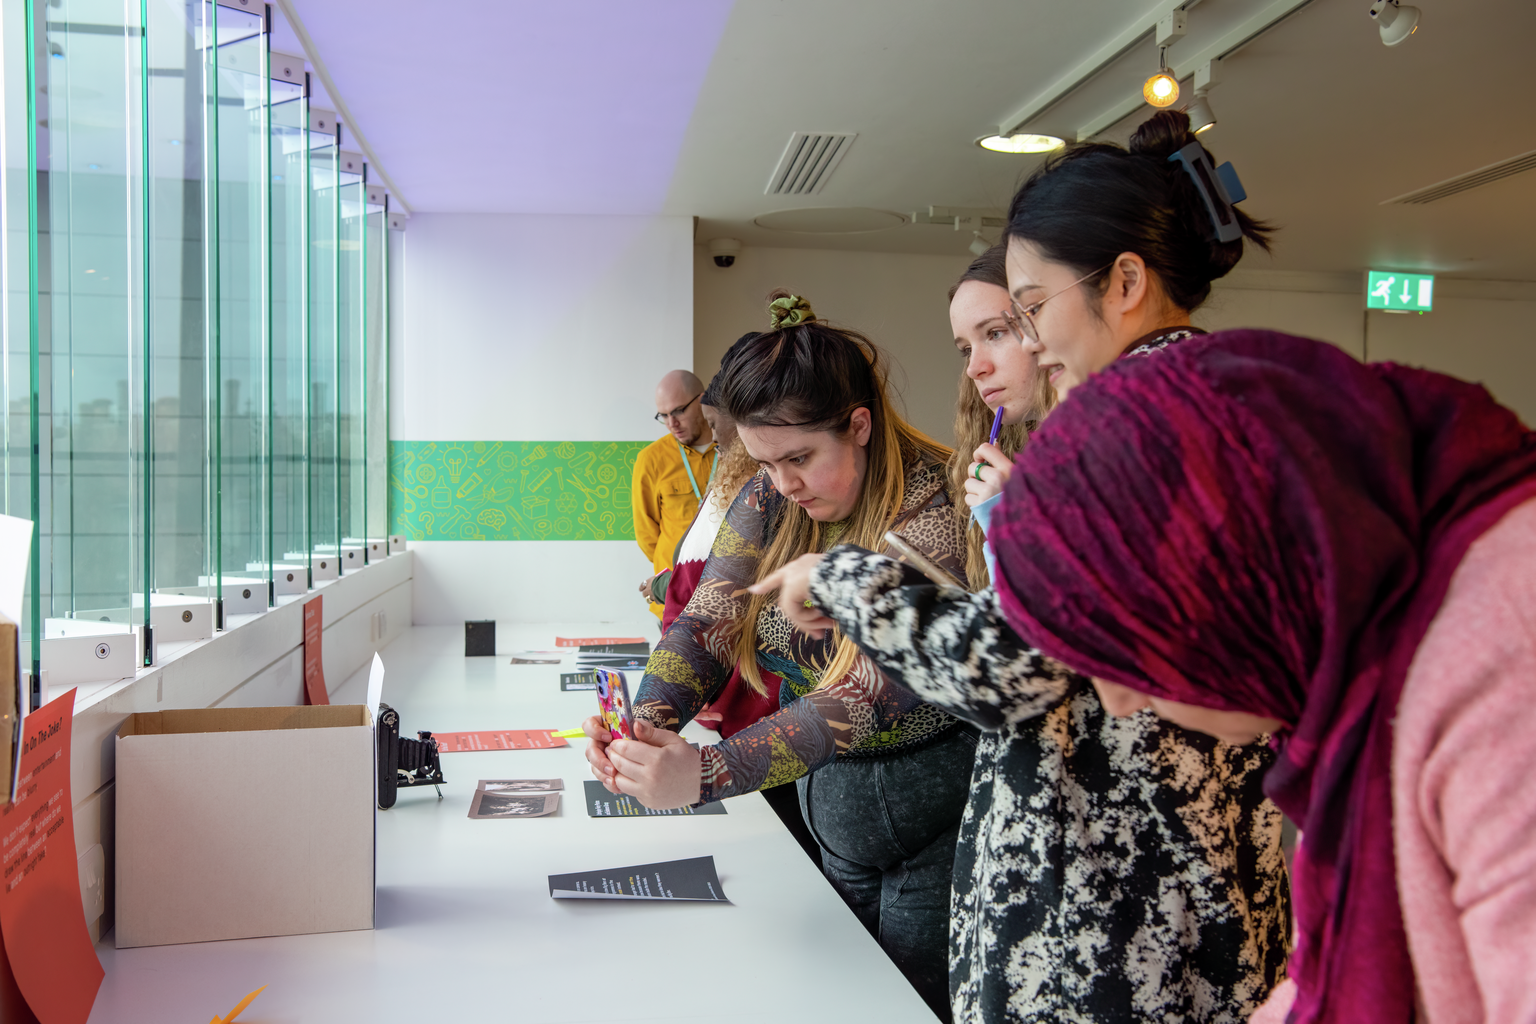 A group of people look at designs for museum displays, with some making notes or taking photos